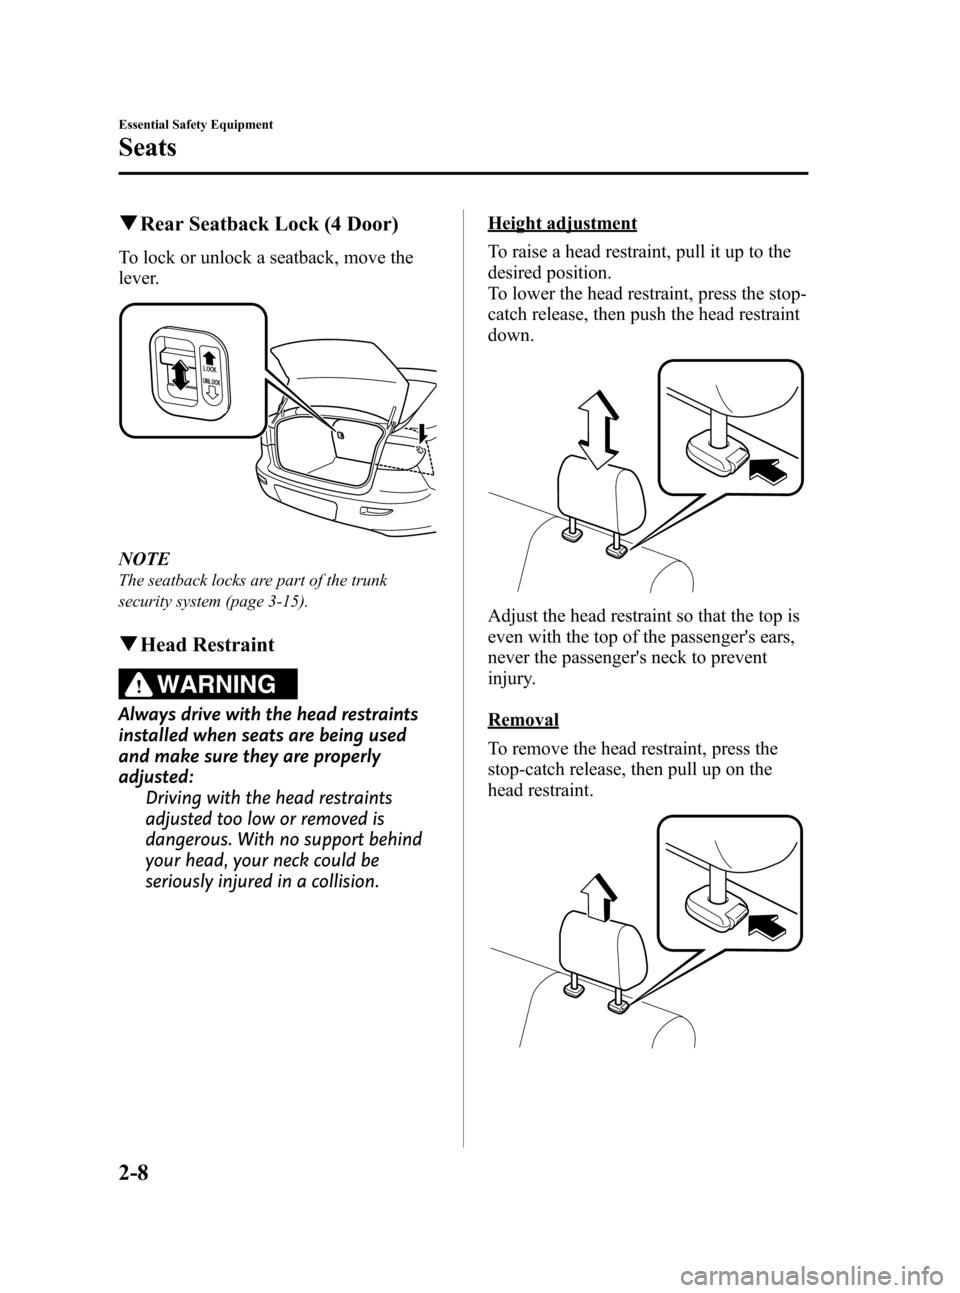 MAZDA MODEL 3 HATCHBACK 2008   (in English) Owners Guide Black plate (22,1)
qRear Seatback Lock (4 Door)
To lock or unlock a seatback, move the
lever.
NOTE
The seatback locks are part of the trunk
security system (page 3-15).
qHead Restraint
WARNING
Always 